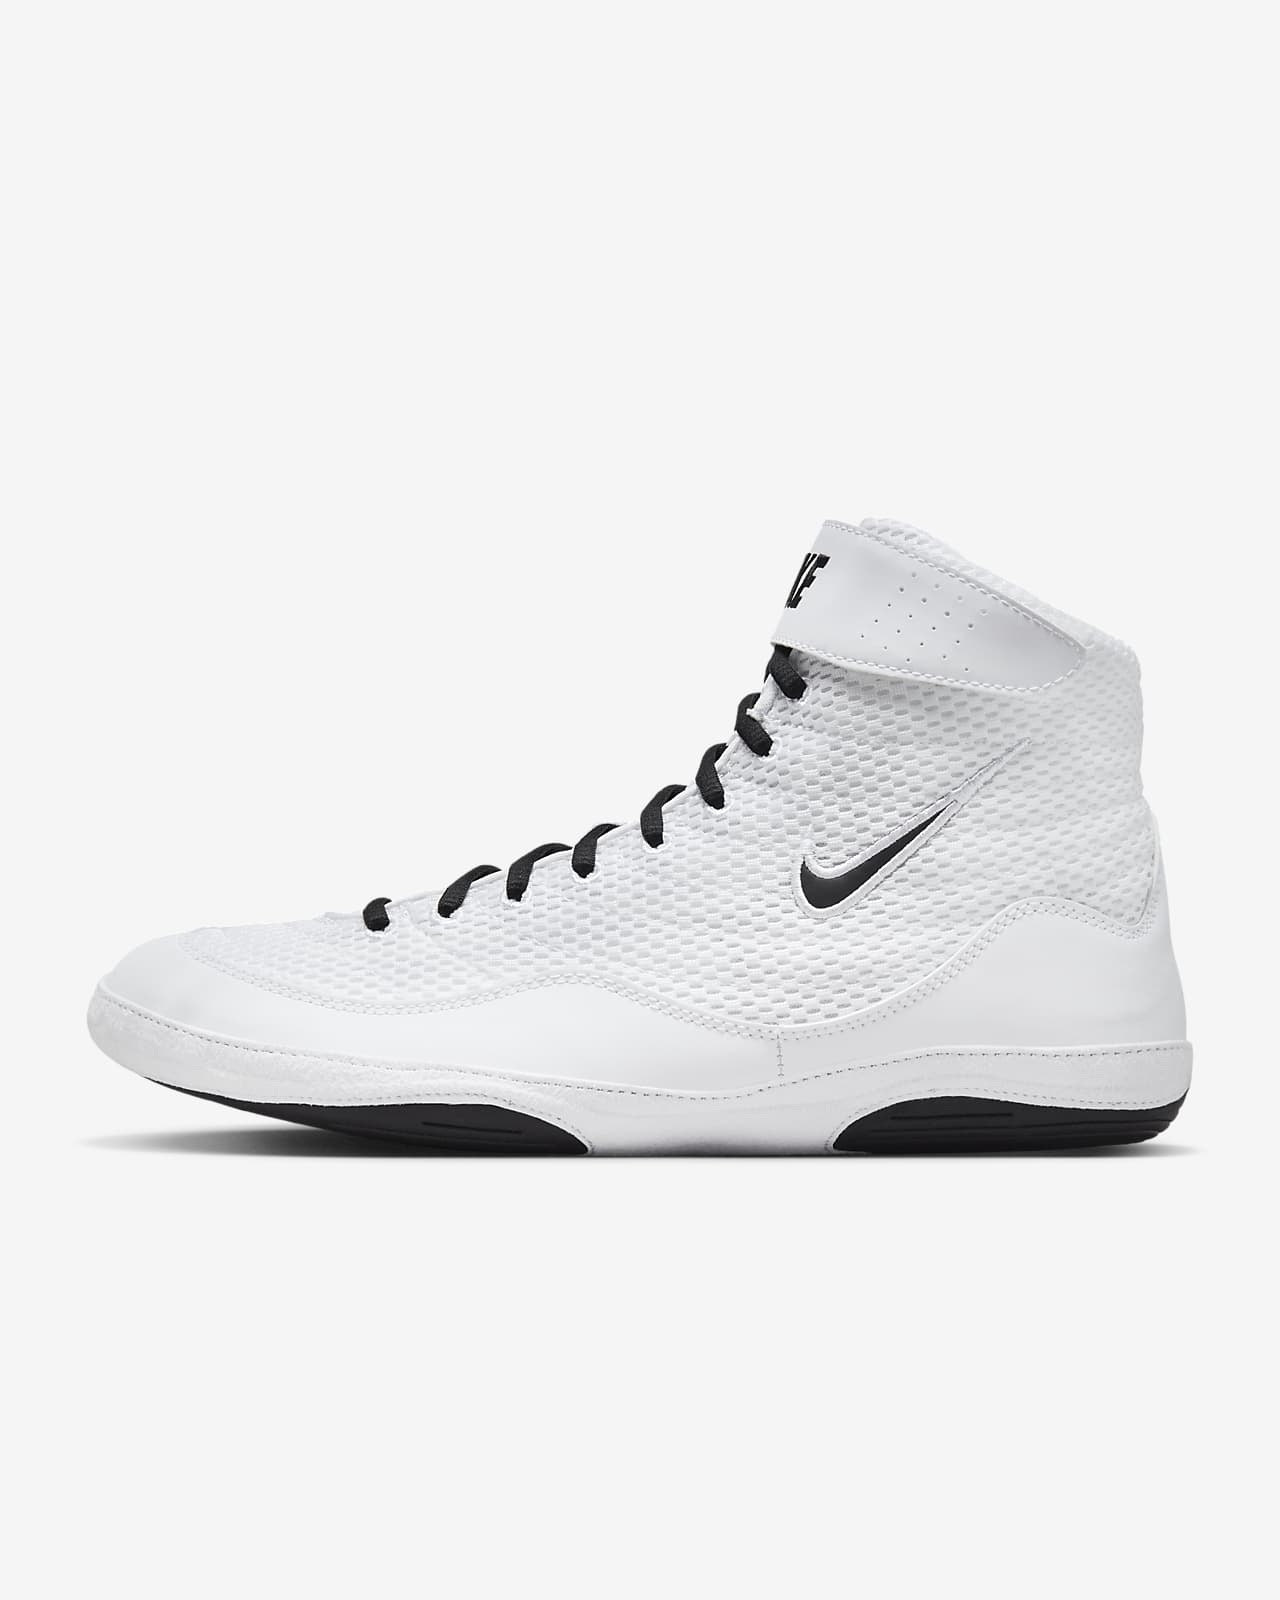 Nike Inflict Wrestling Shoes.